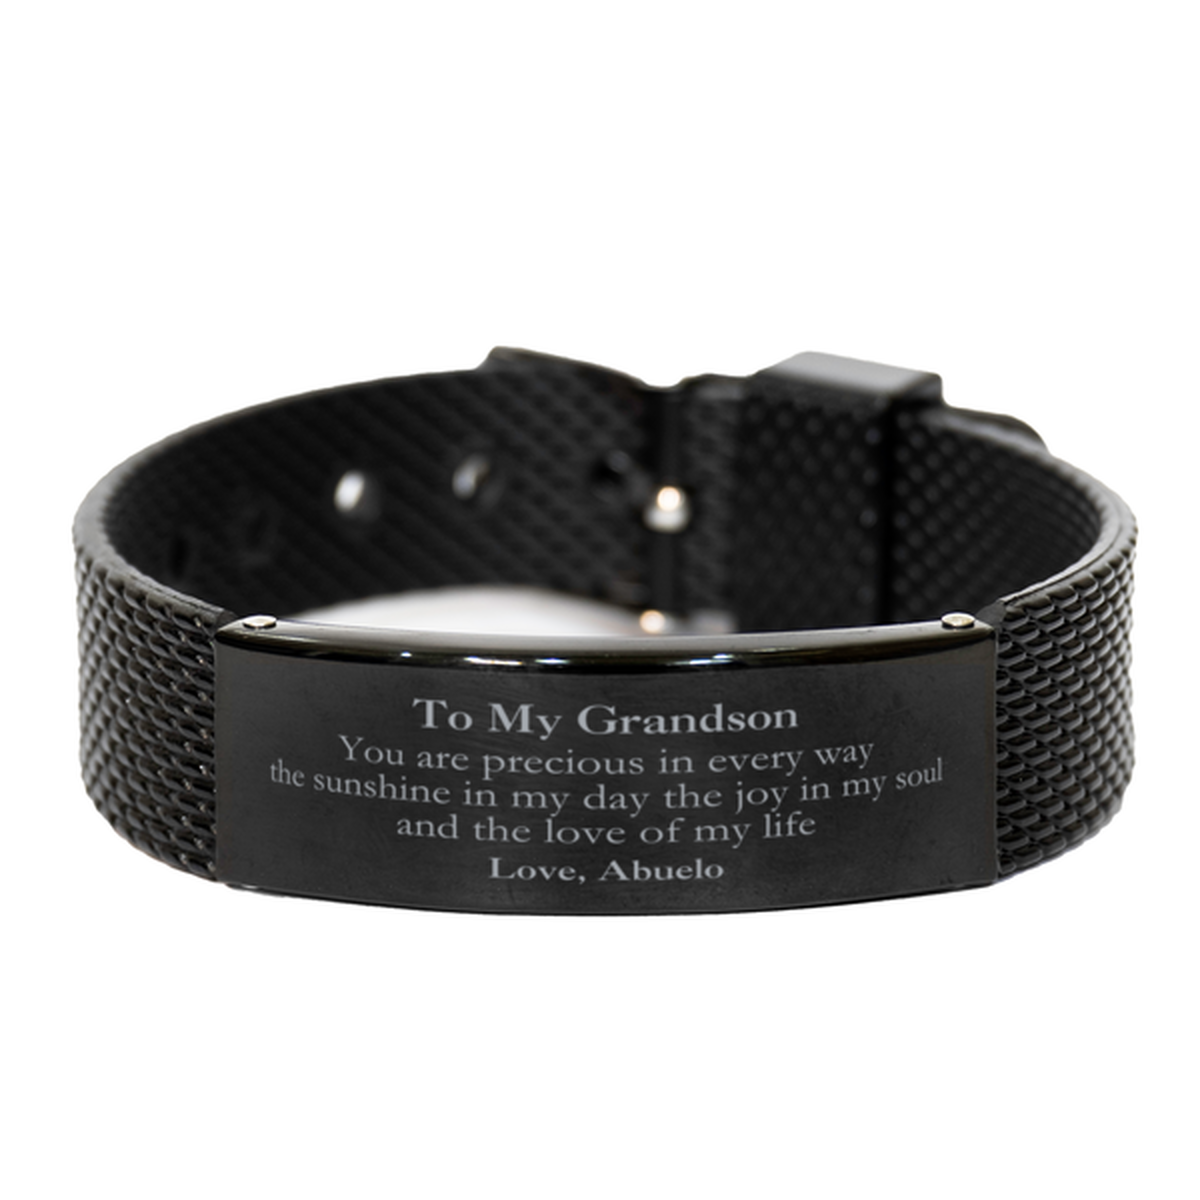 Graduation Gifts for Grandson Black Shark Mesh Bracelet Present from Abuelo, Christmas Grandson Birthday Gifts Grandson You are precious in every way the sunshine in my day. Love, Abuelo